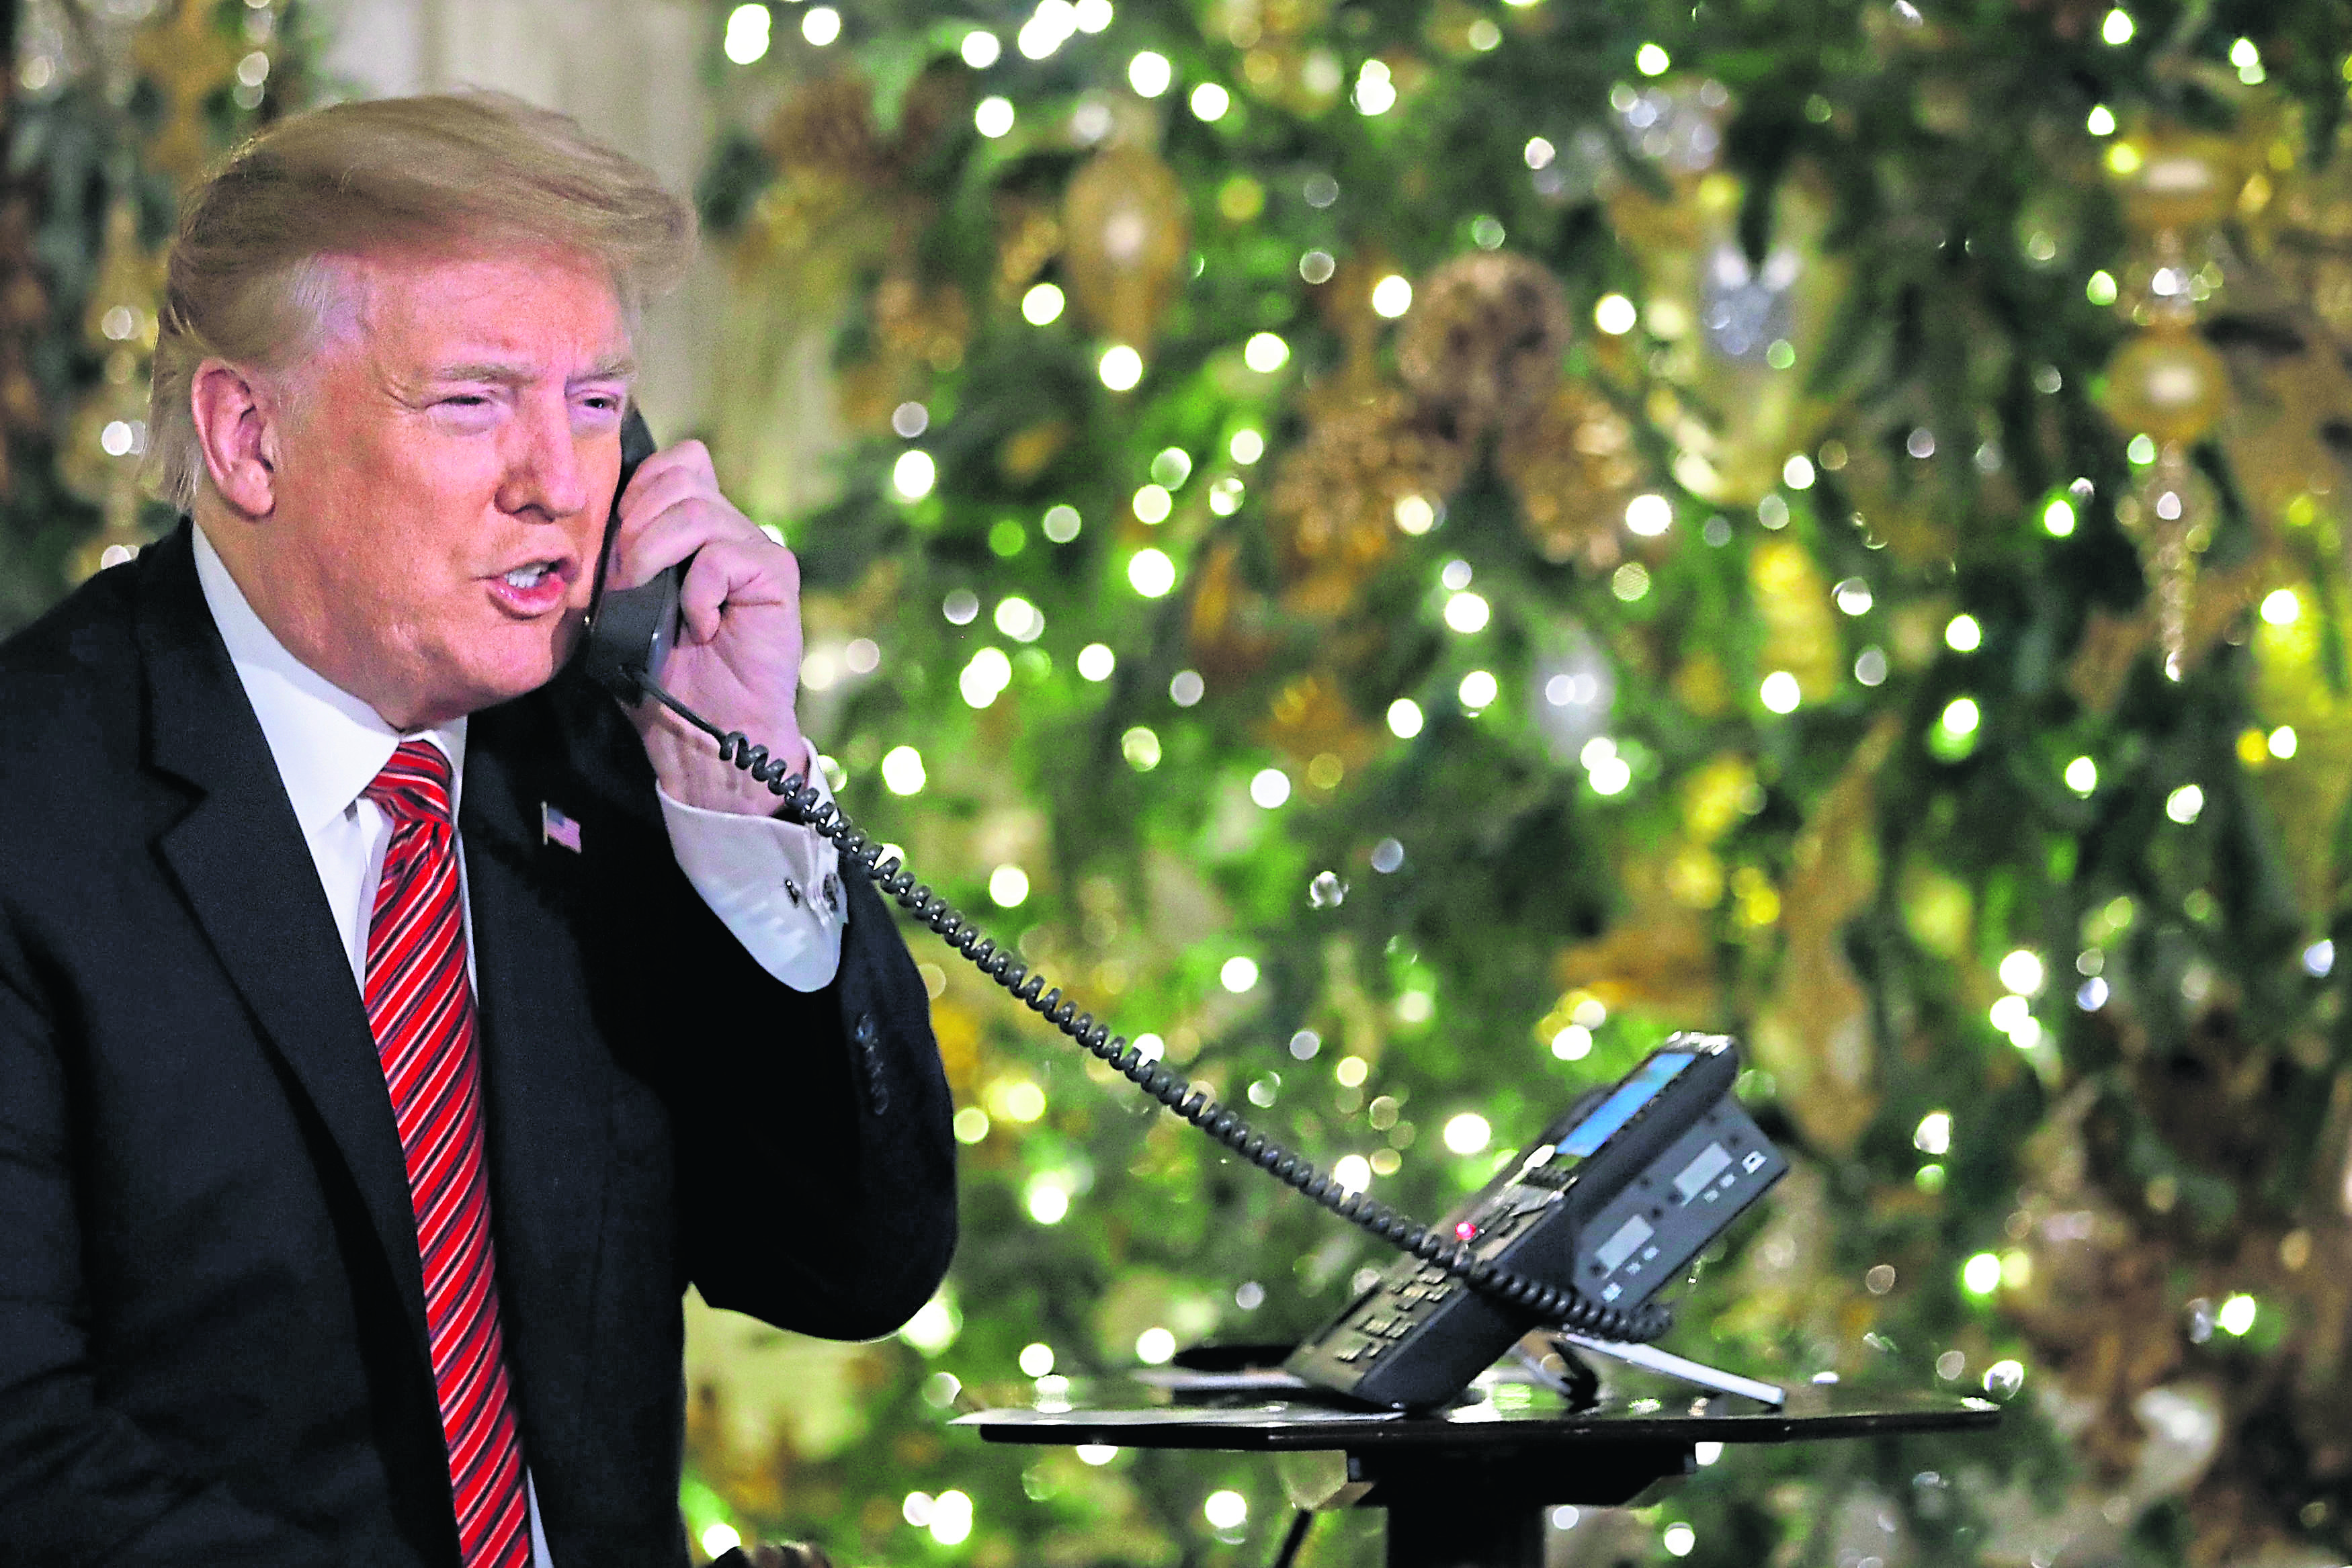 Can we put our trust in US President Donald Trump to make the right call when dealing with sensitive international relations – or those closer to home such as whether our young children believe that Santa exists?